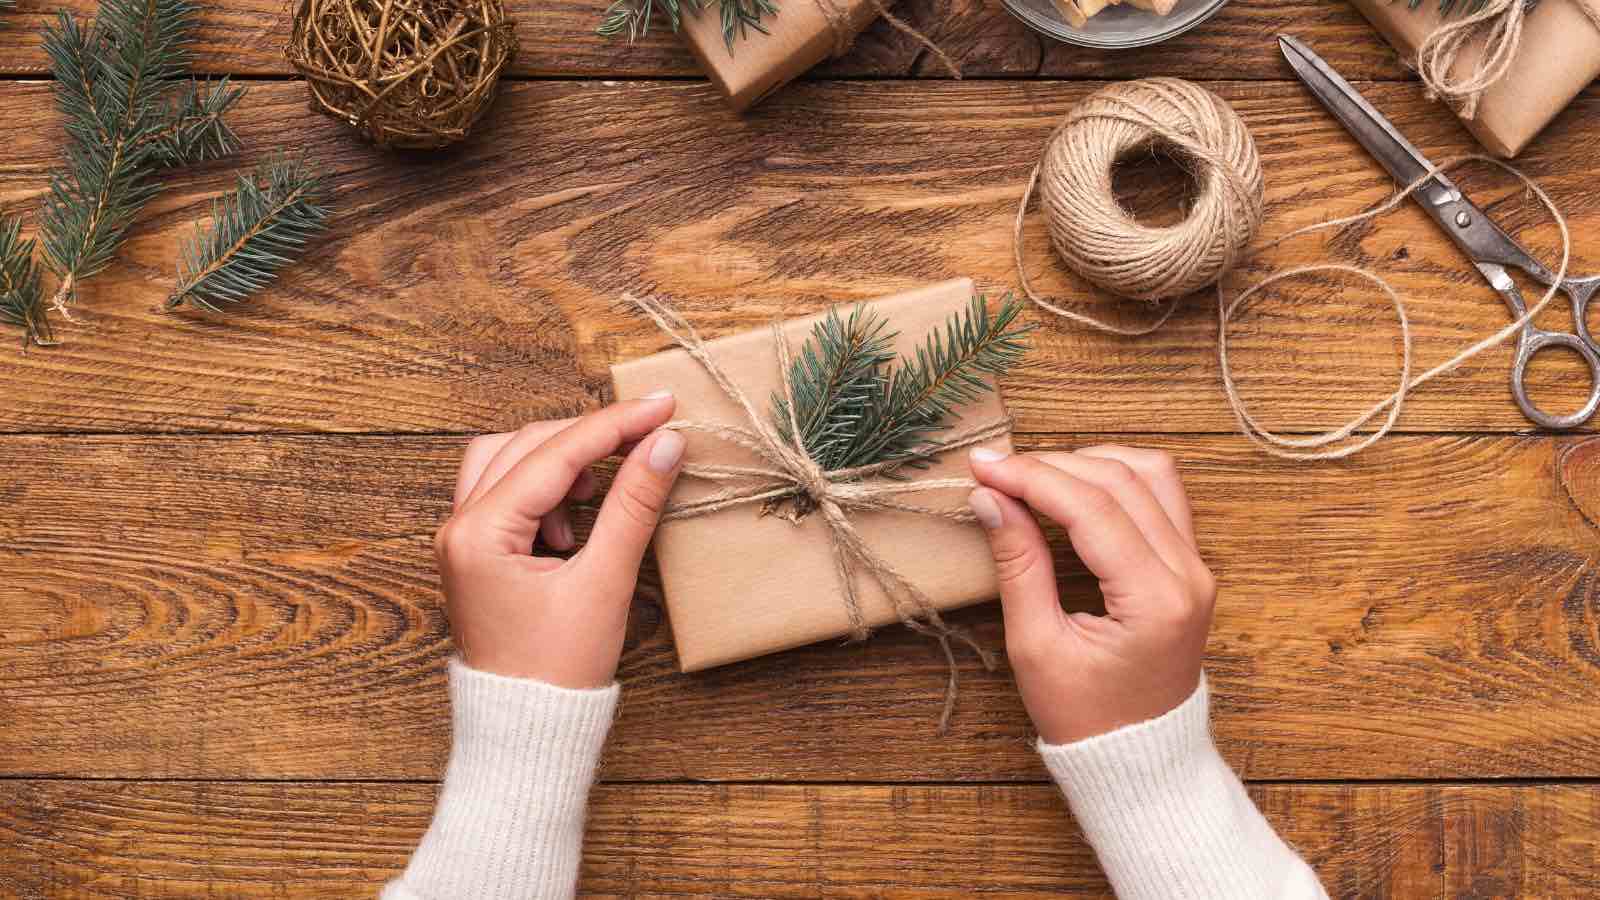 BROWN PAPER GIFT WRAPPING IDEAS - Place Of My Taste